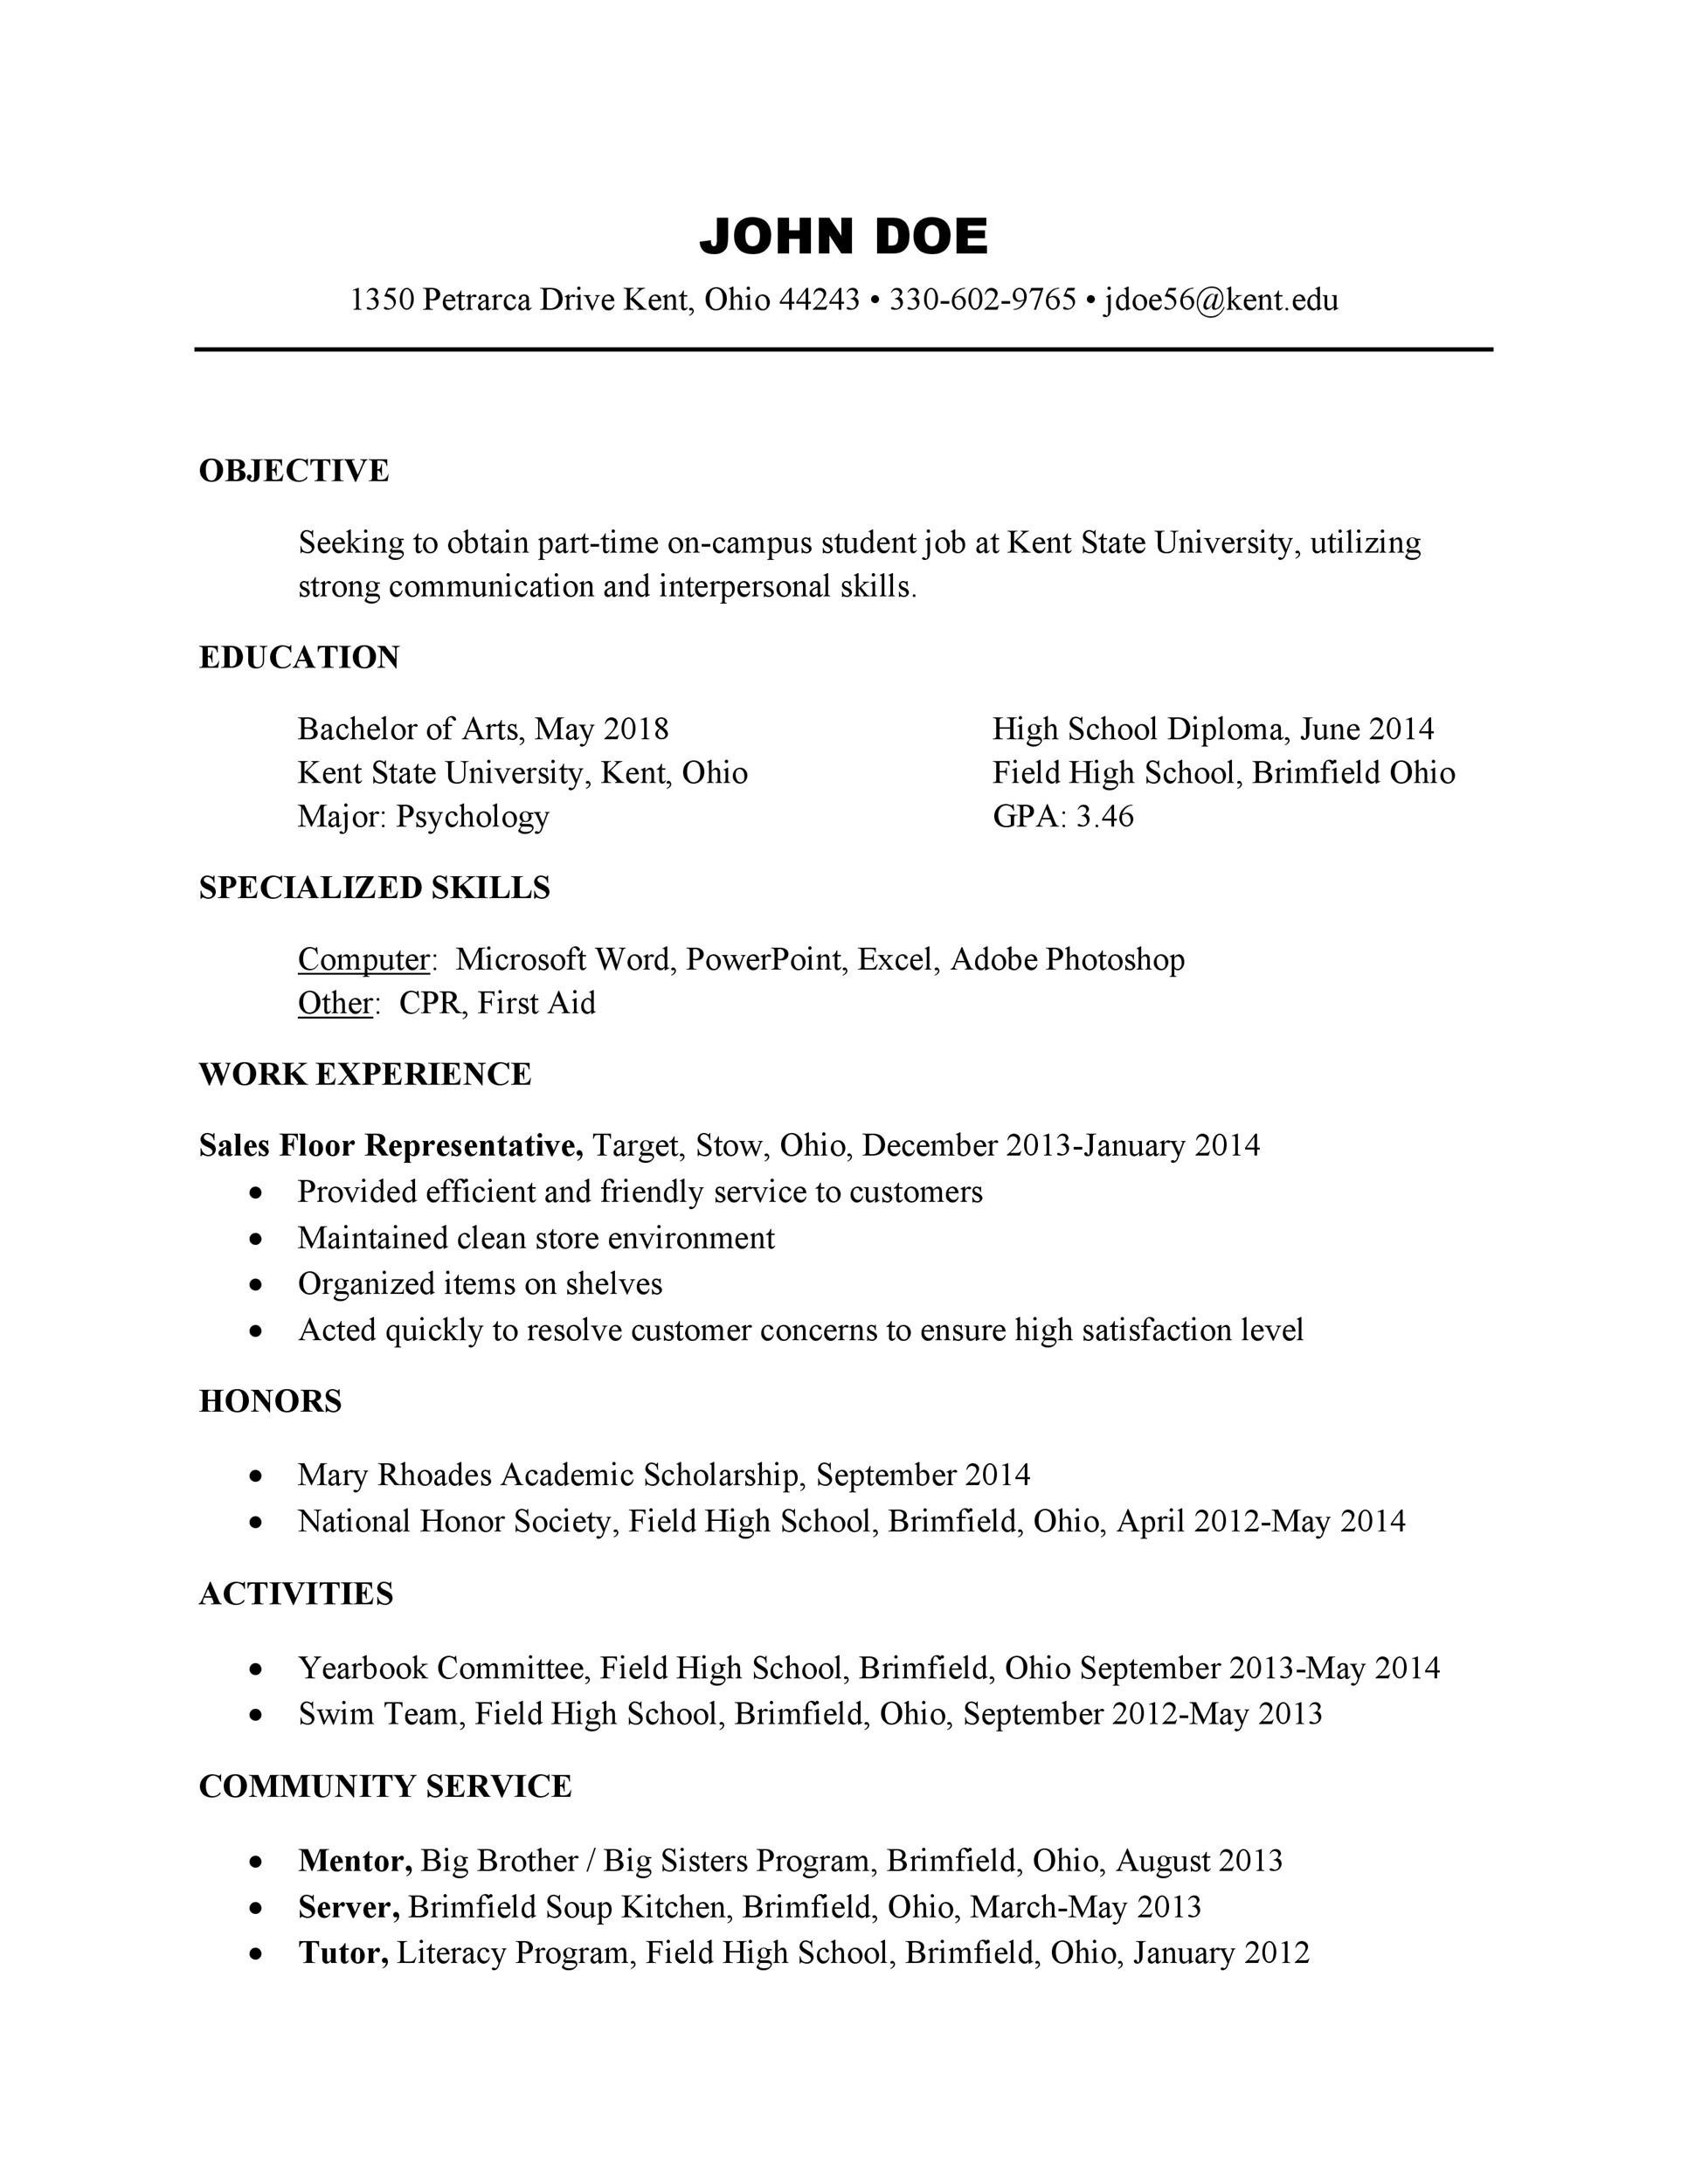 writing resume for college application